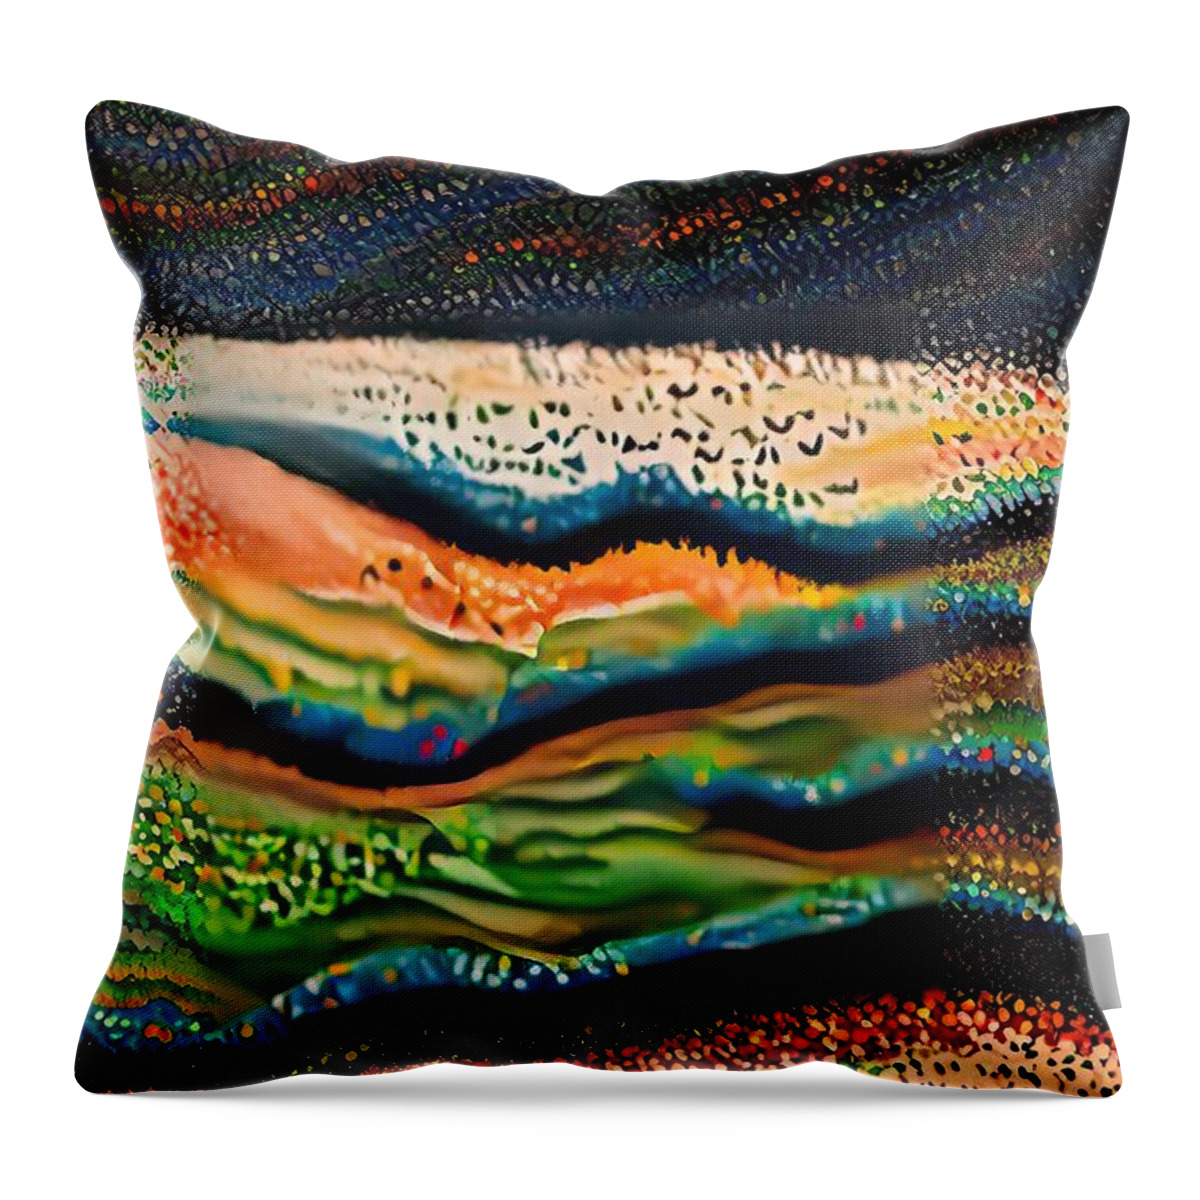 Texture Throw Pillow featuring the painting Texture Pattern Fabric Textile Abstract Art Painting by N Akkash